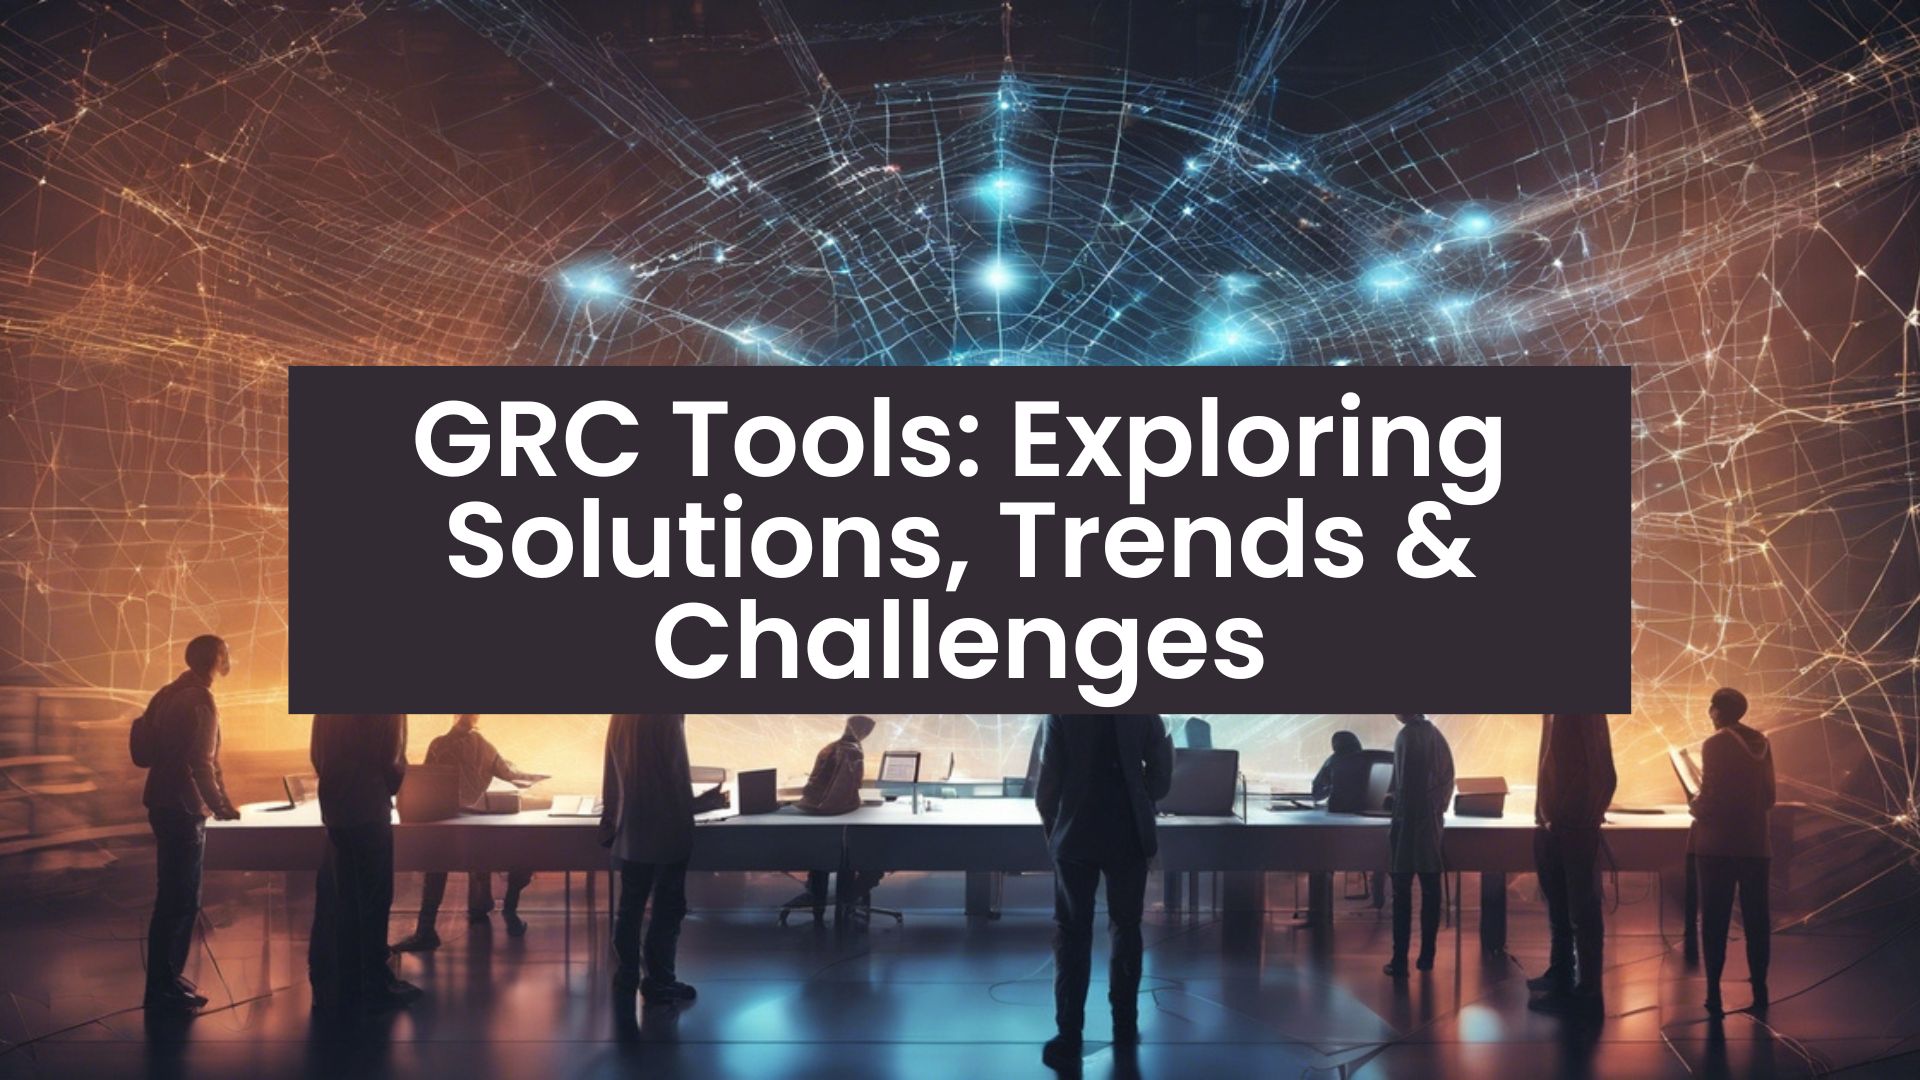 GRC Tools Exploring Solutions, Trends & Challenges